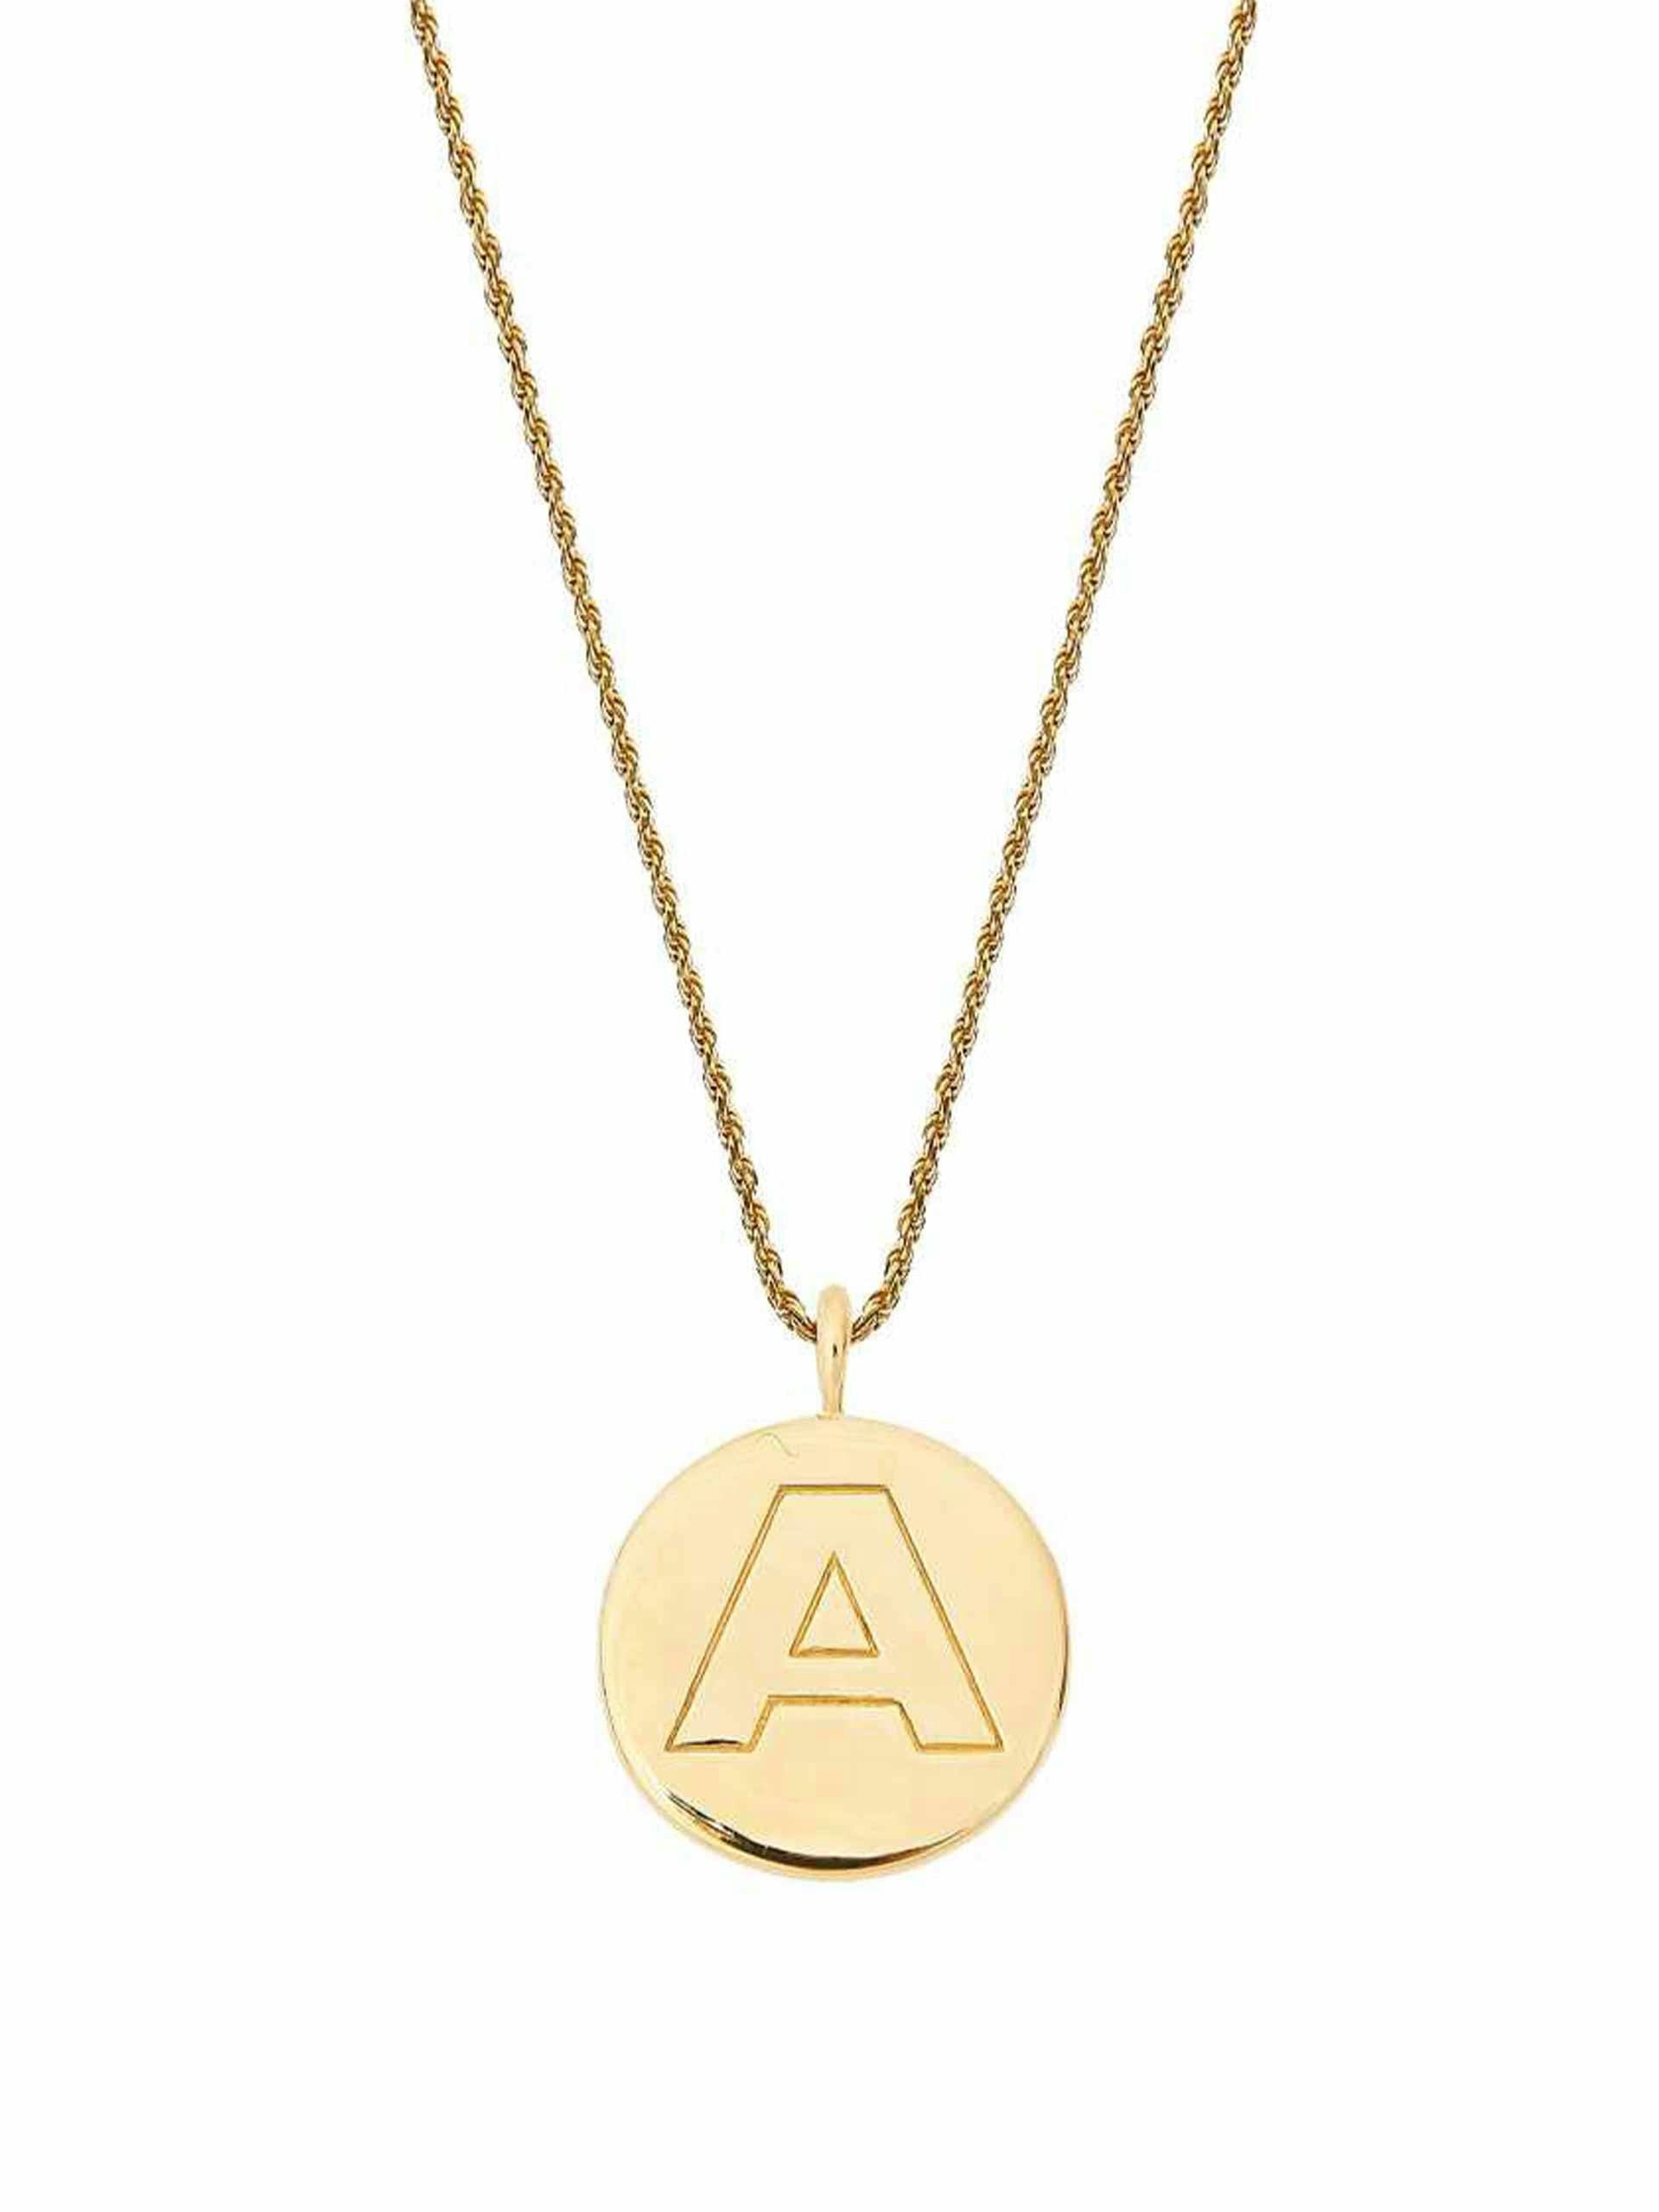 Gold initial pendant necklace